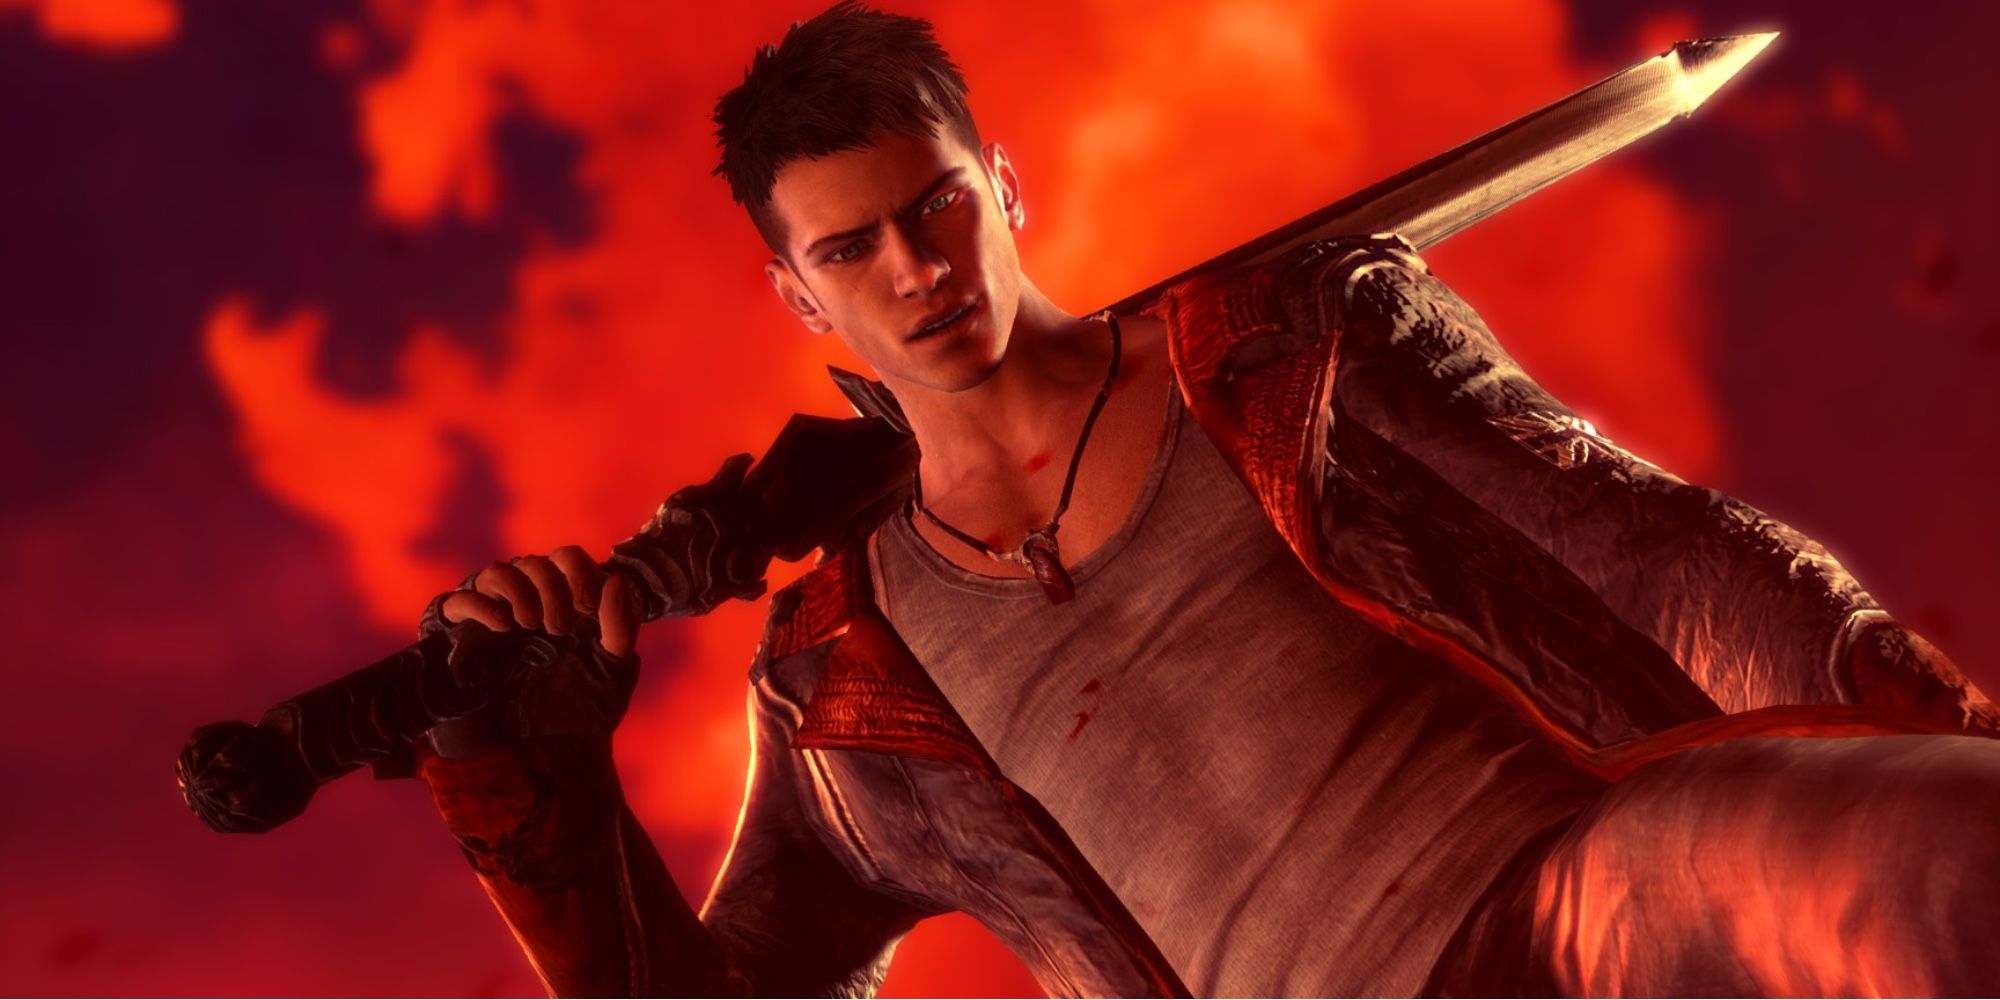 Aged Games Worth Playing in 2022 - DmC - Devil May Cry - Dante wields his sword in combat